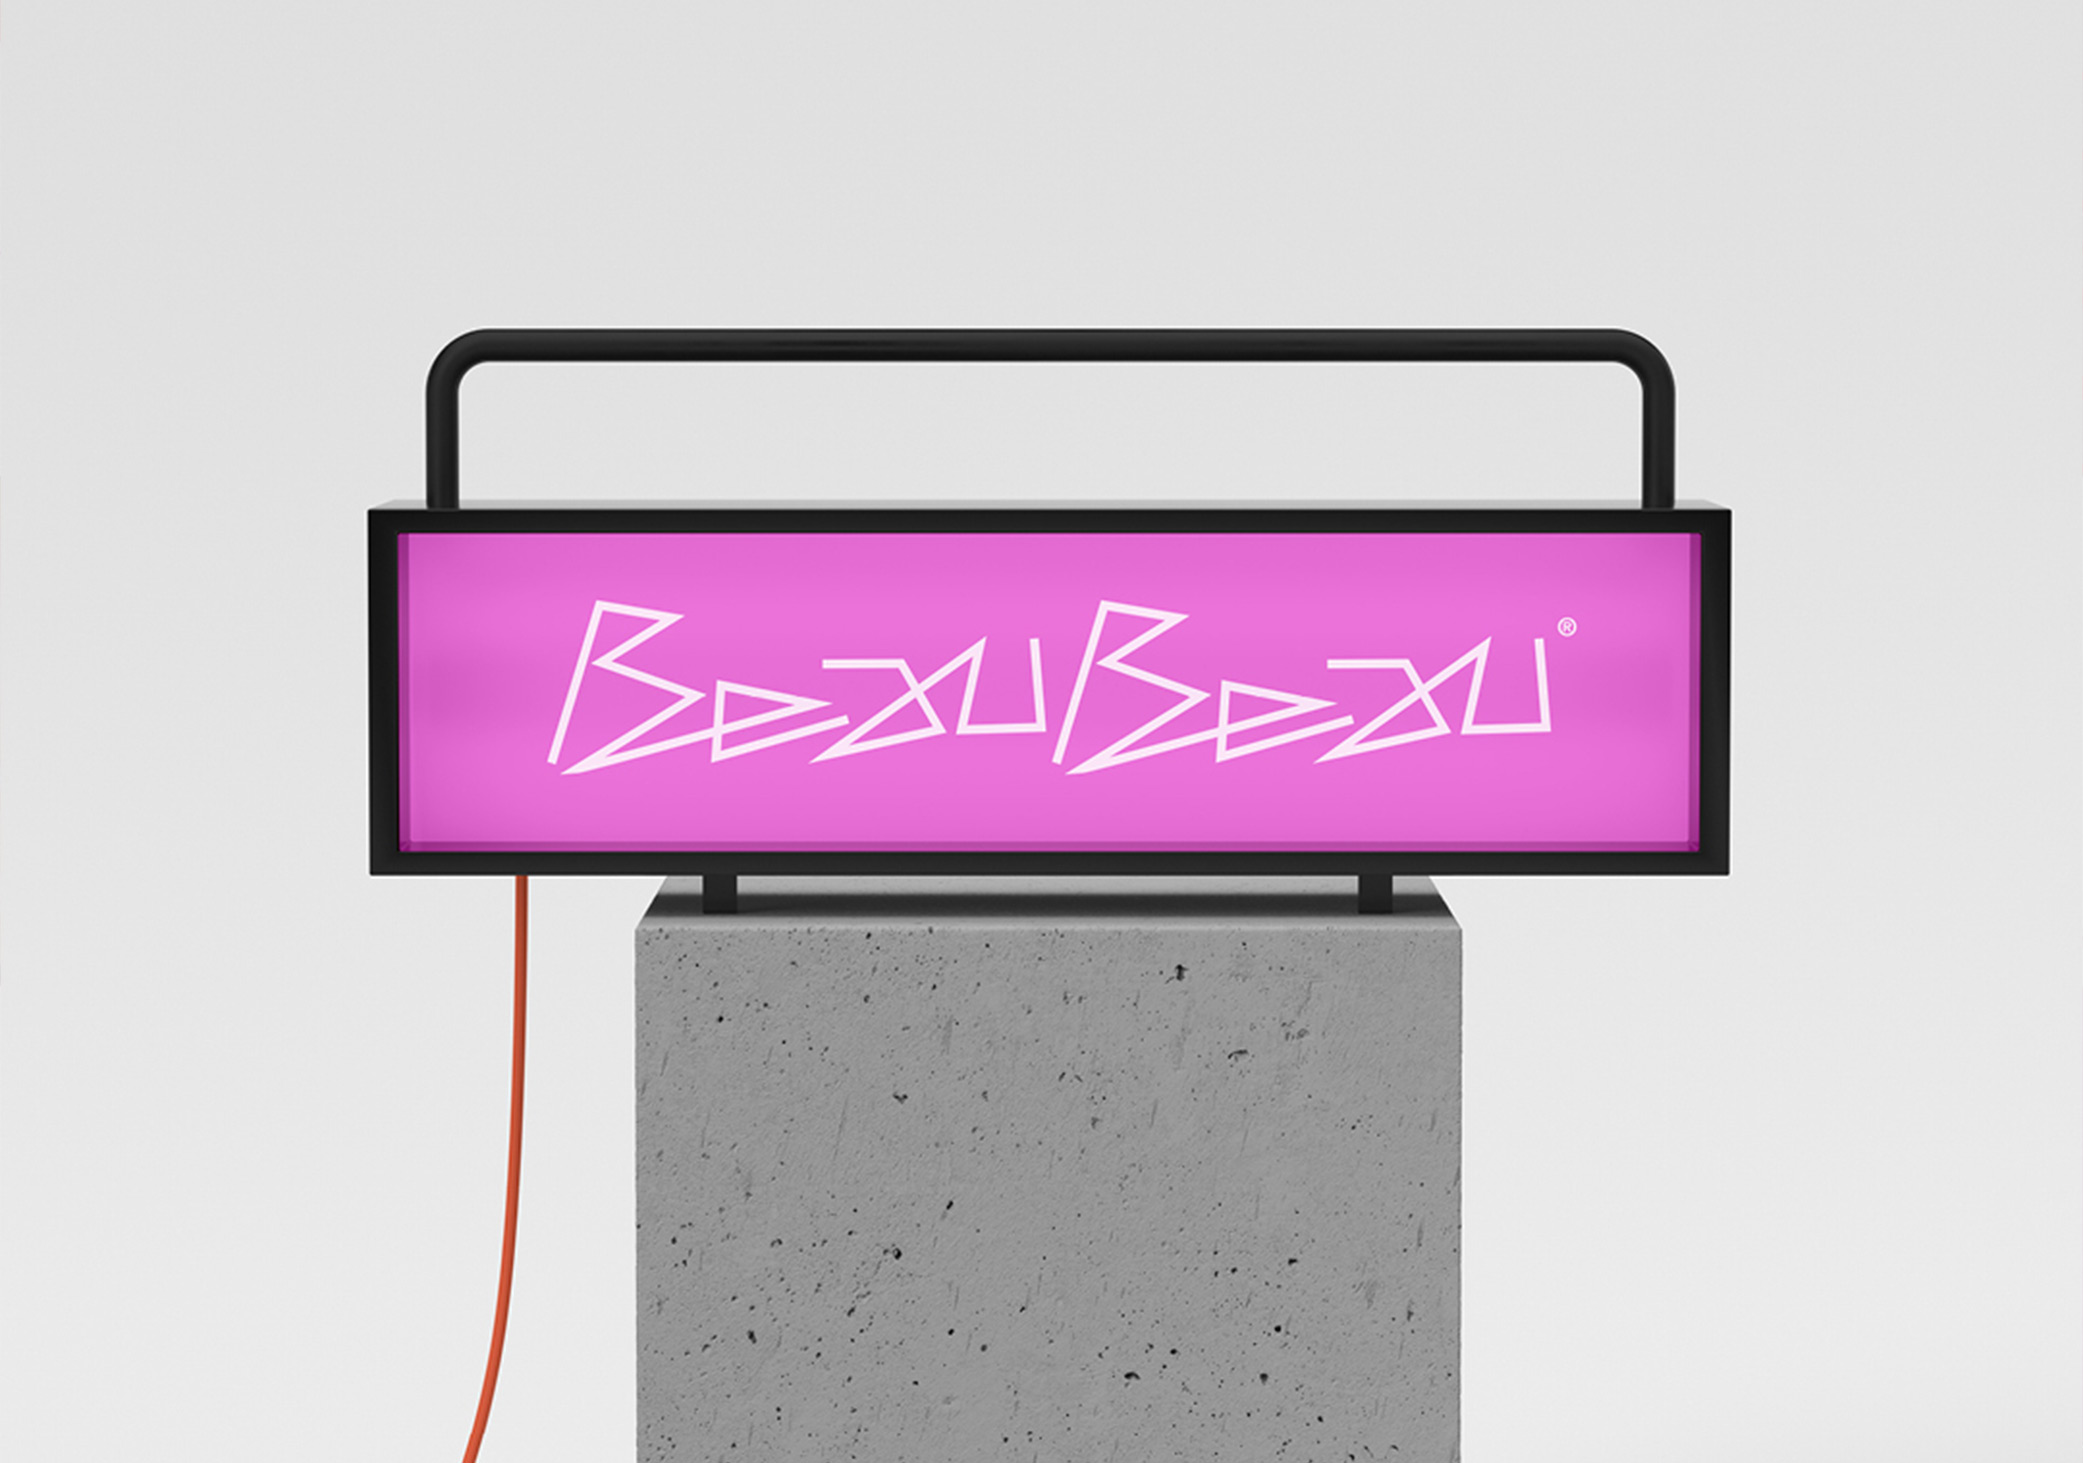 Experimental logo design shown on a neon light signage unit for company called Beau Beau